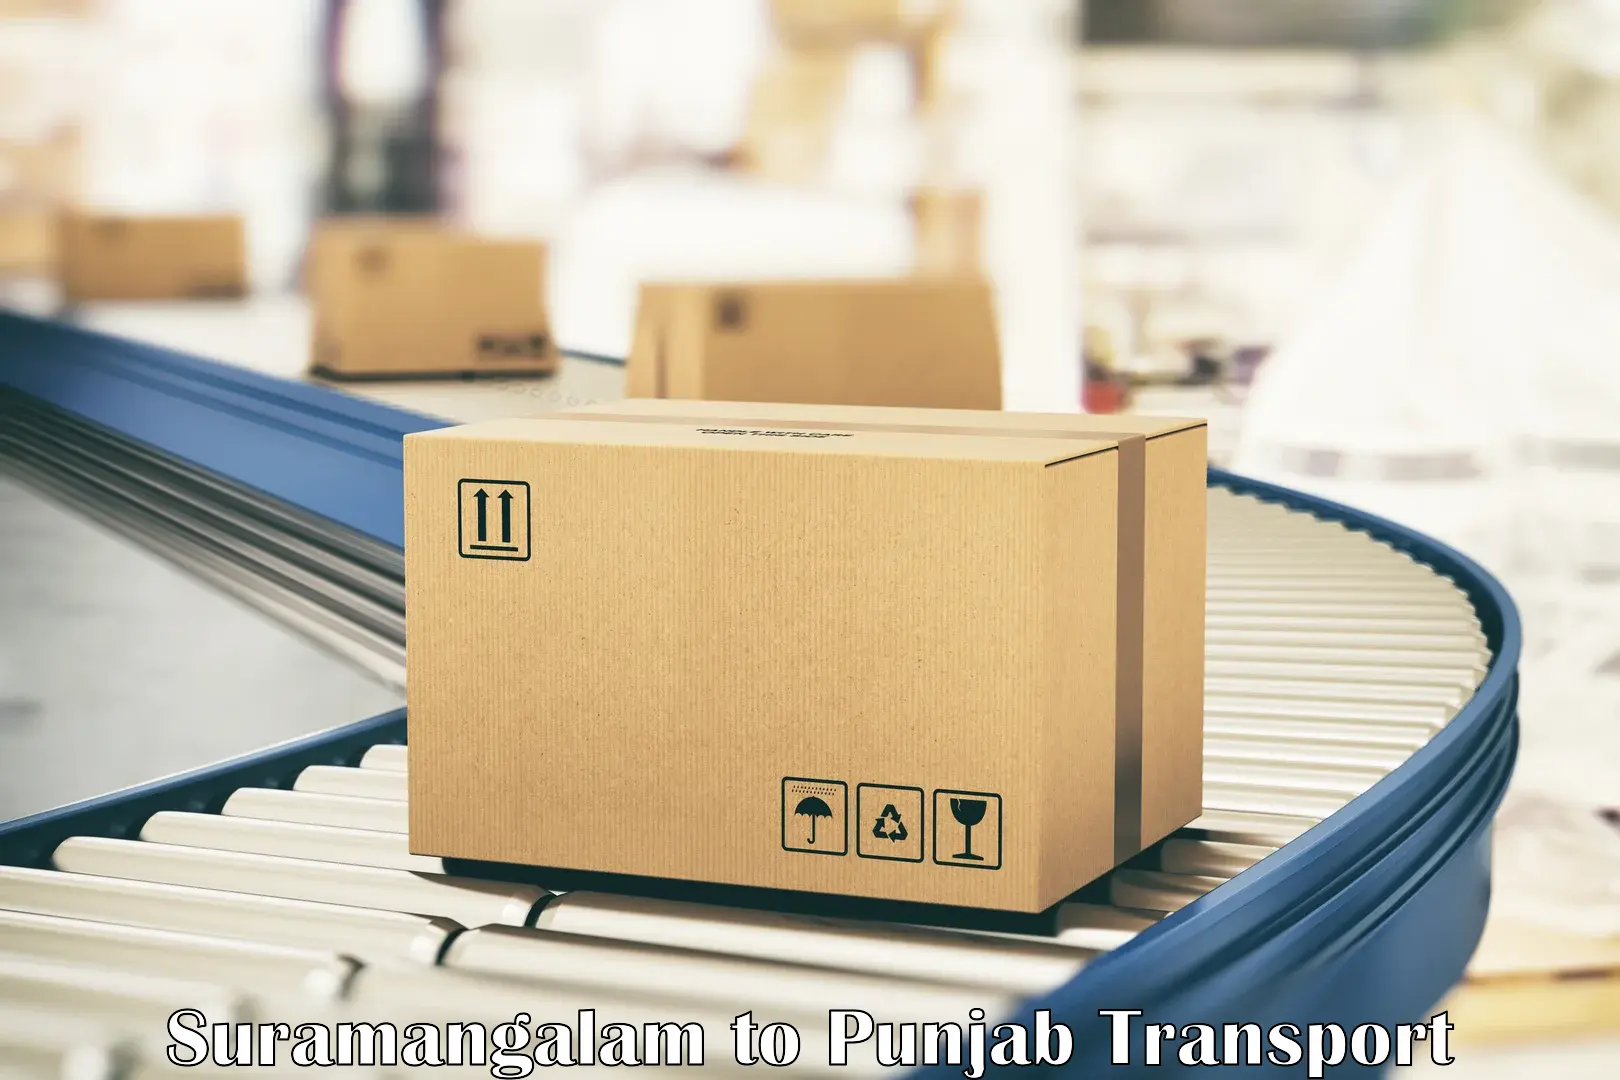 Nationwide transport services Suramangalam to Mohali